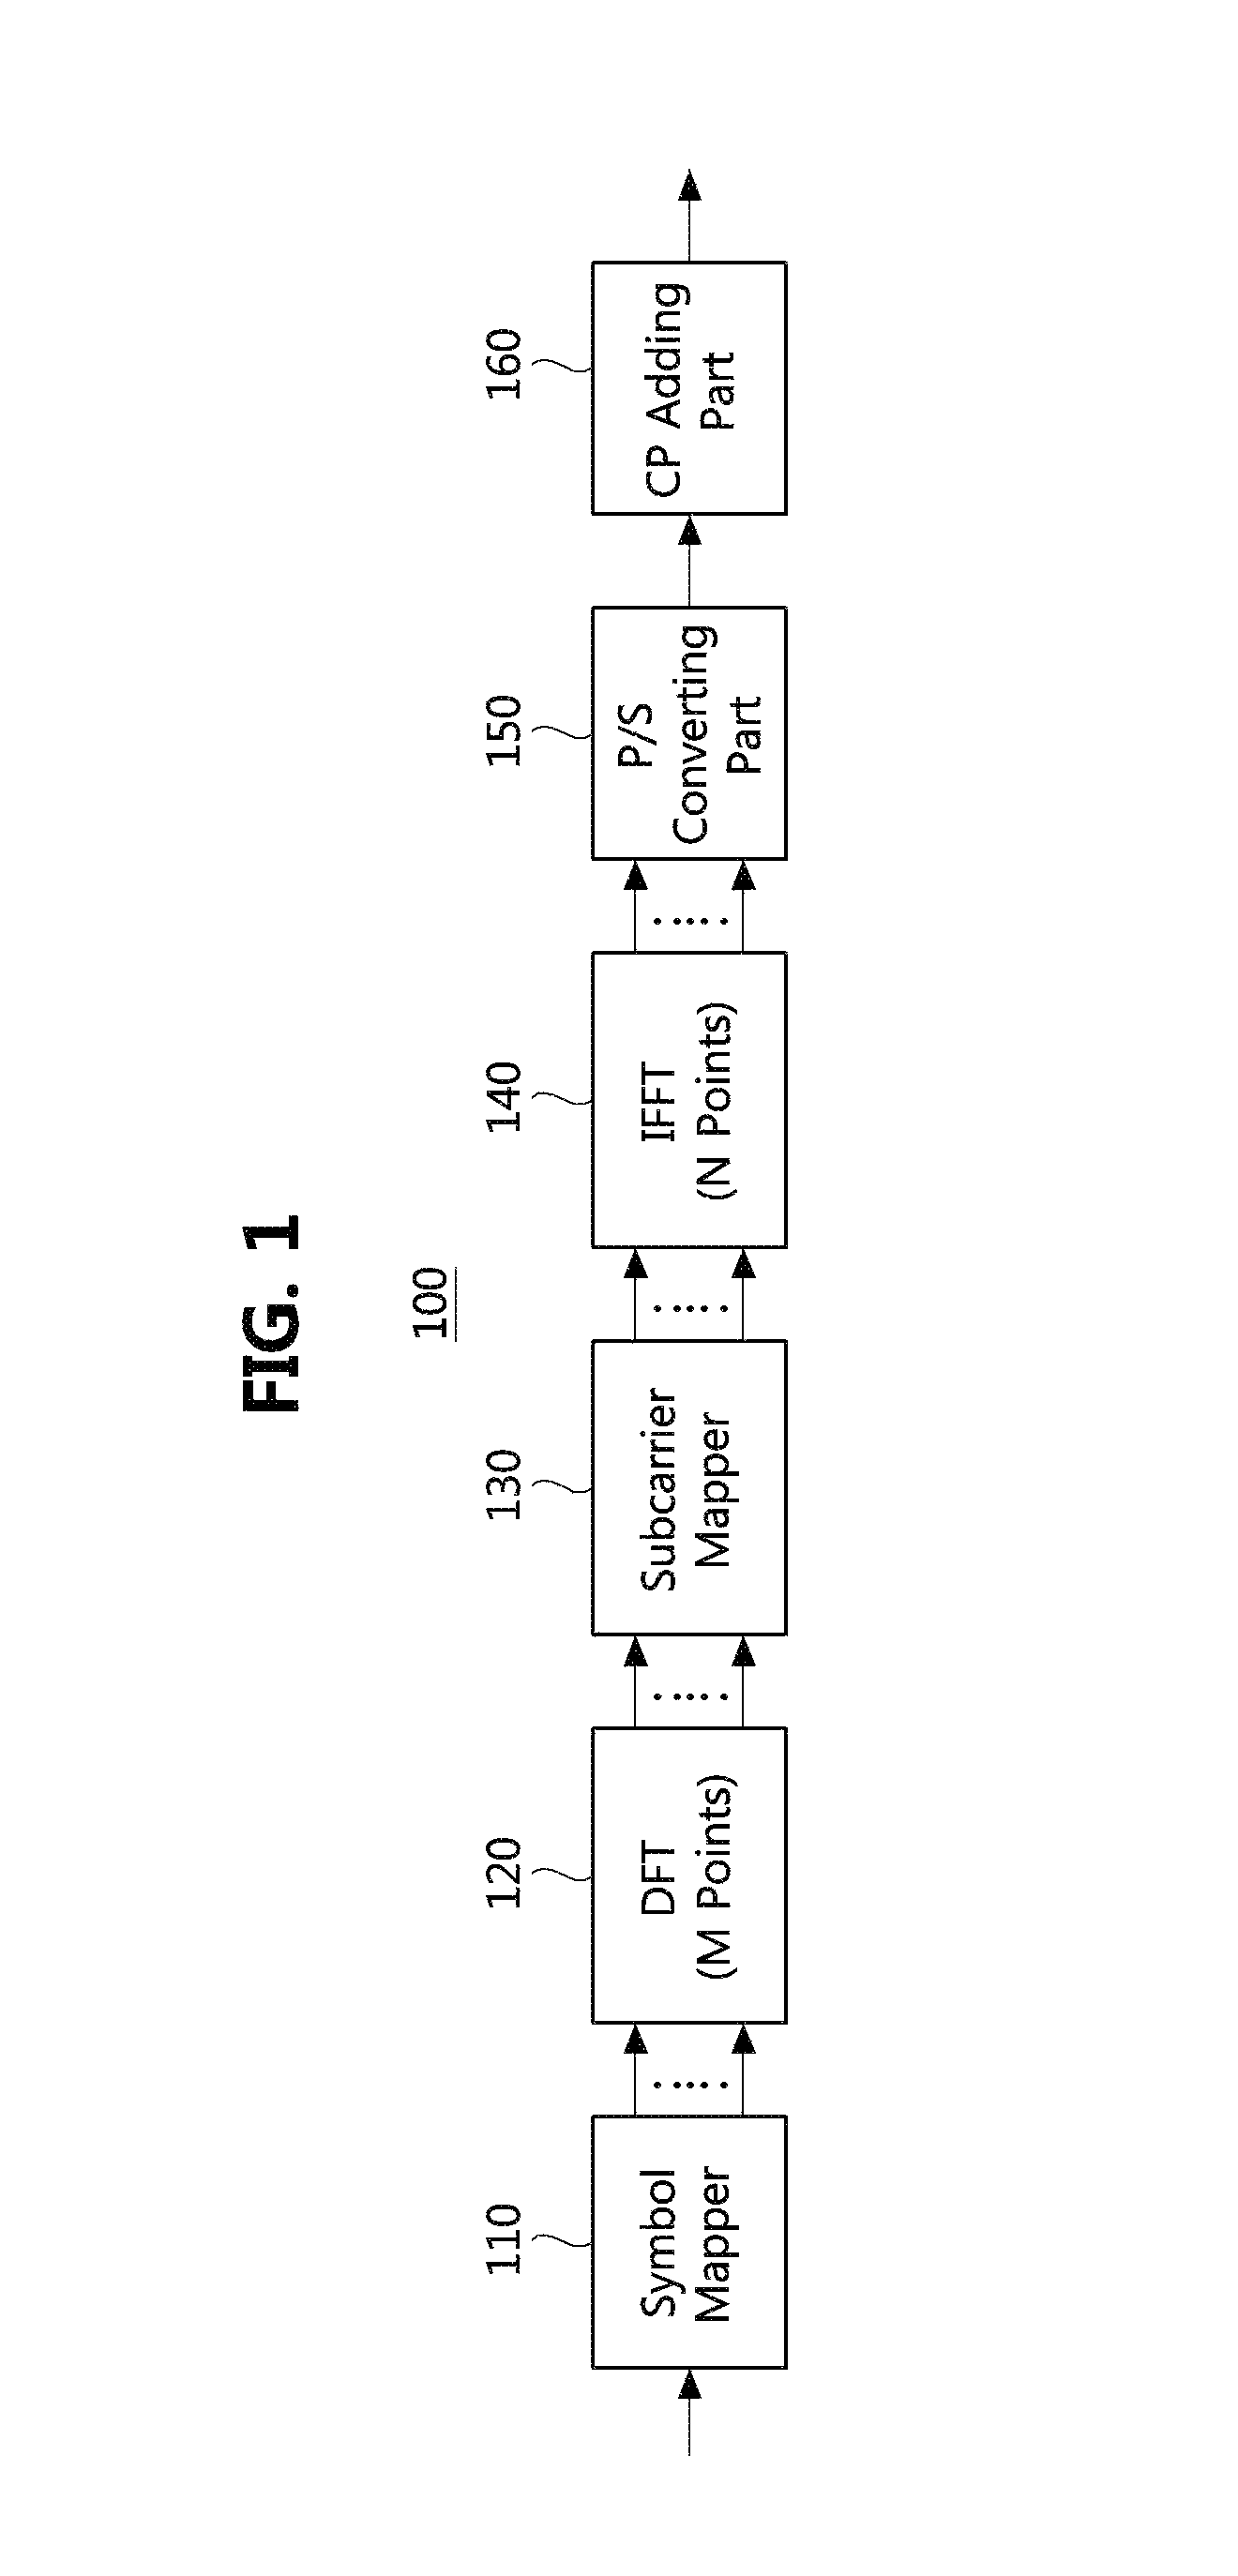 Transmitting and receiving apparatuses for frequency division multiple access